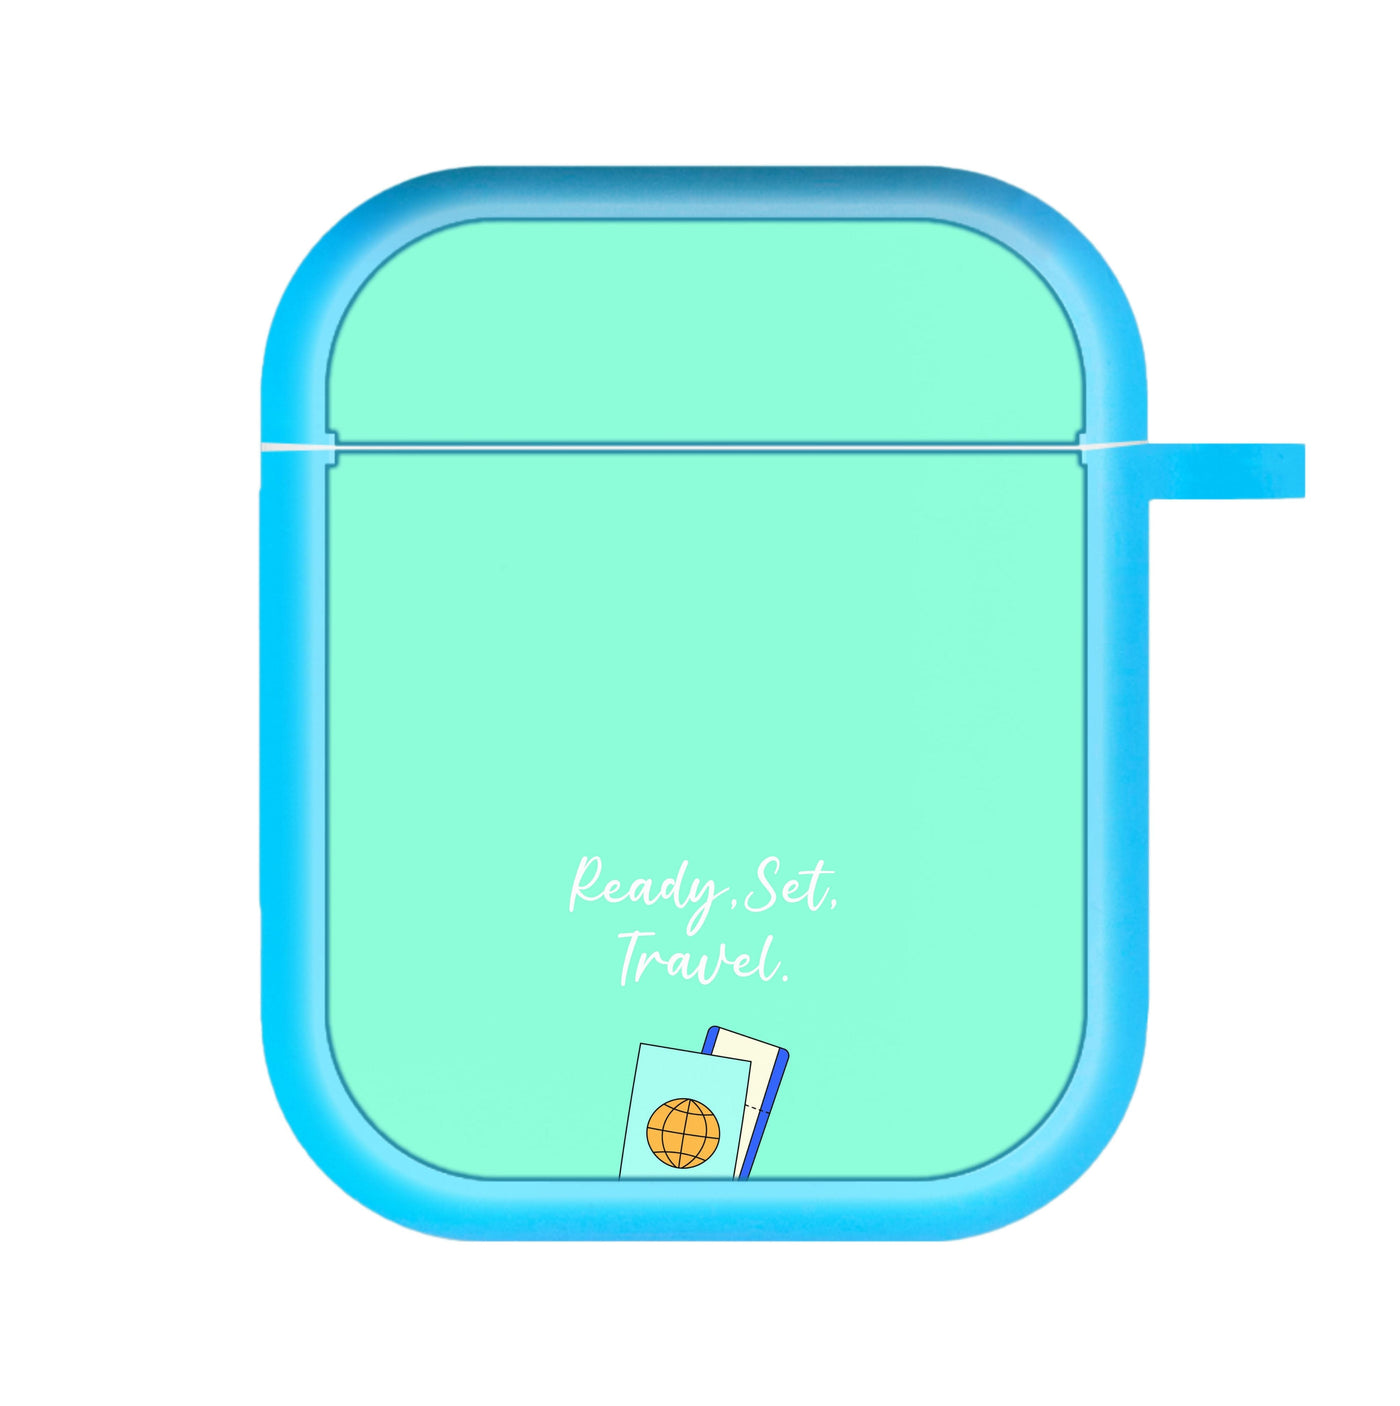 Ready Set Travel - Travel AirPods Case